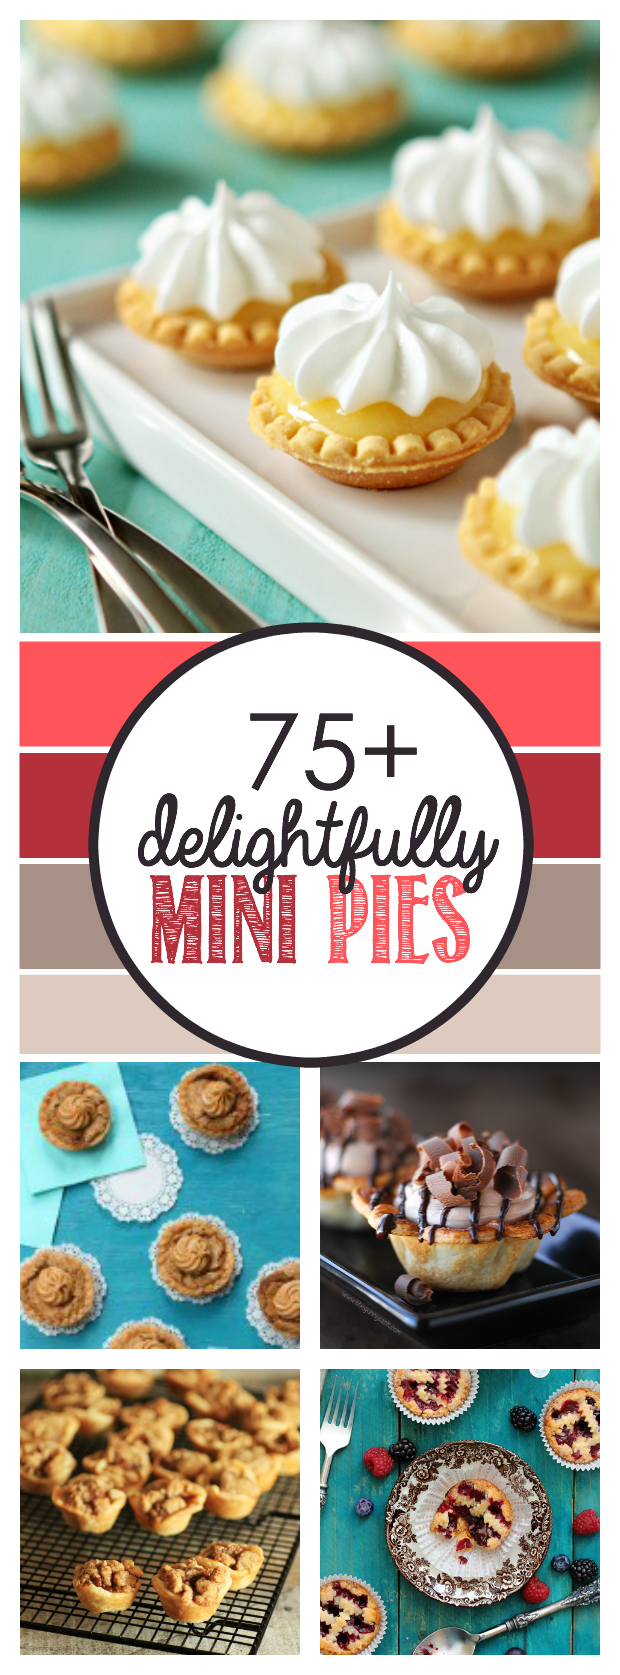 Over 75 recipes for miniature pies, perfect for the holidays!